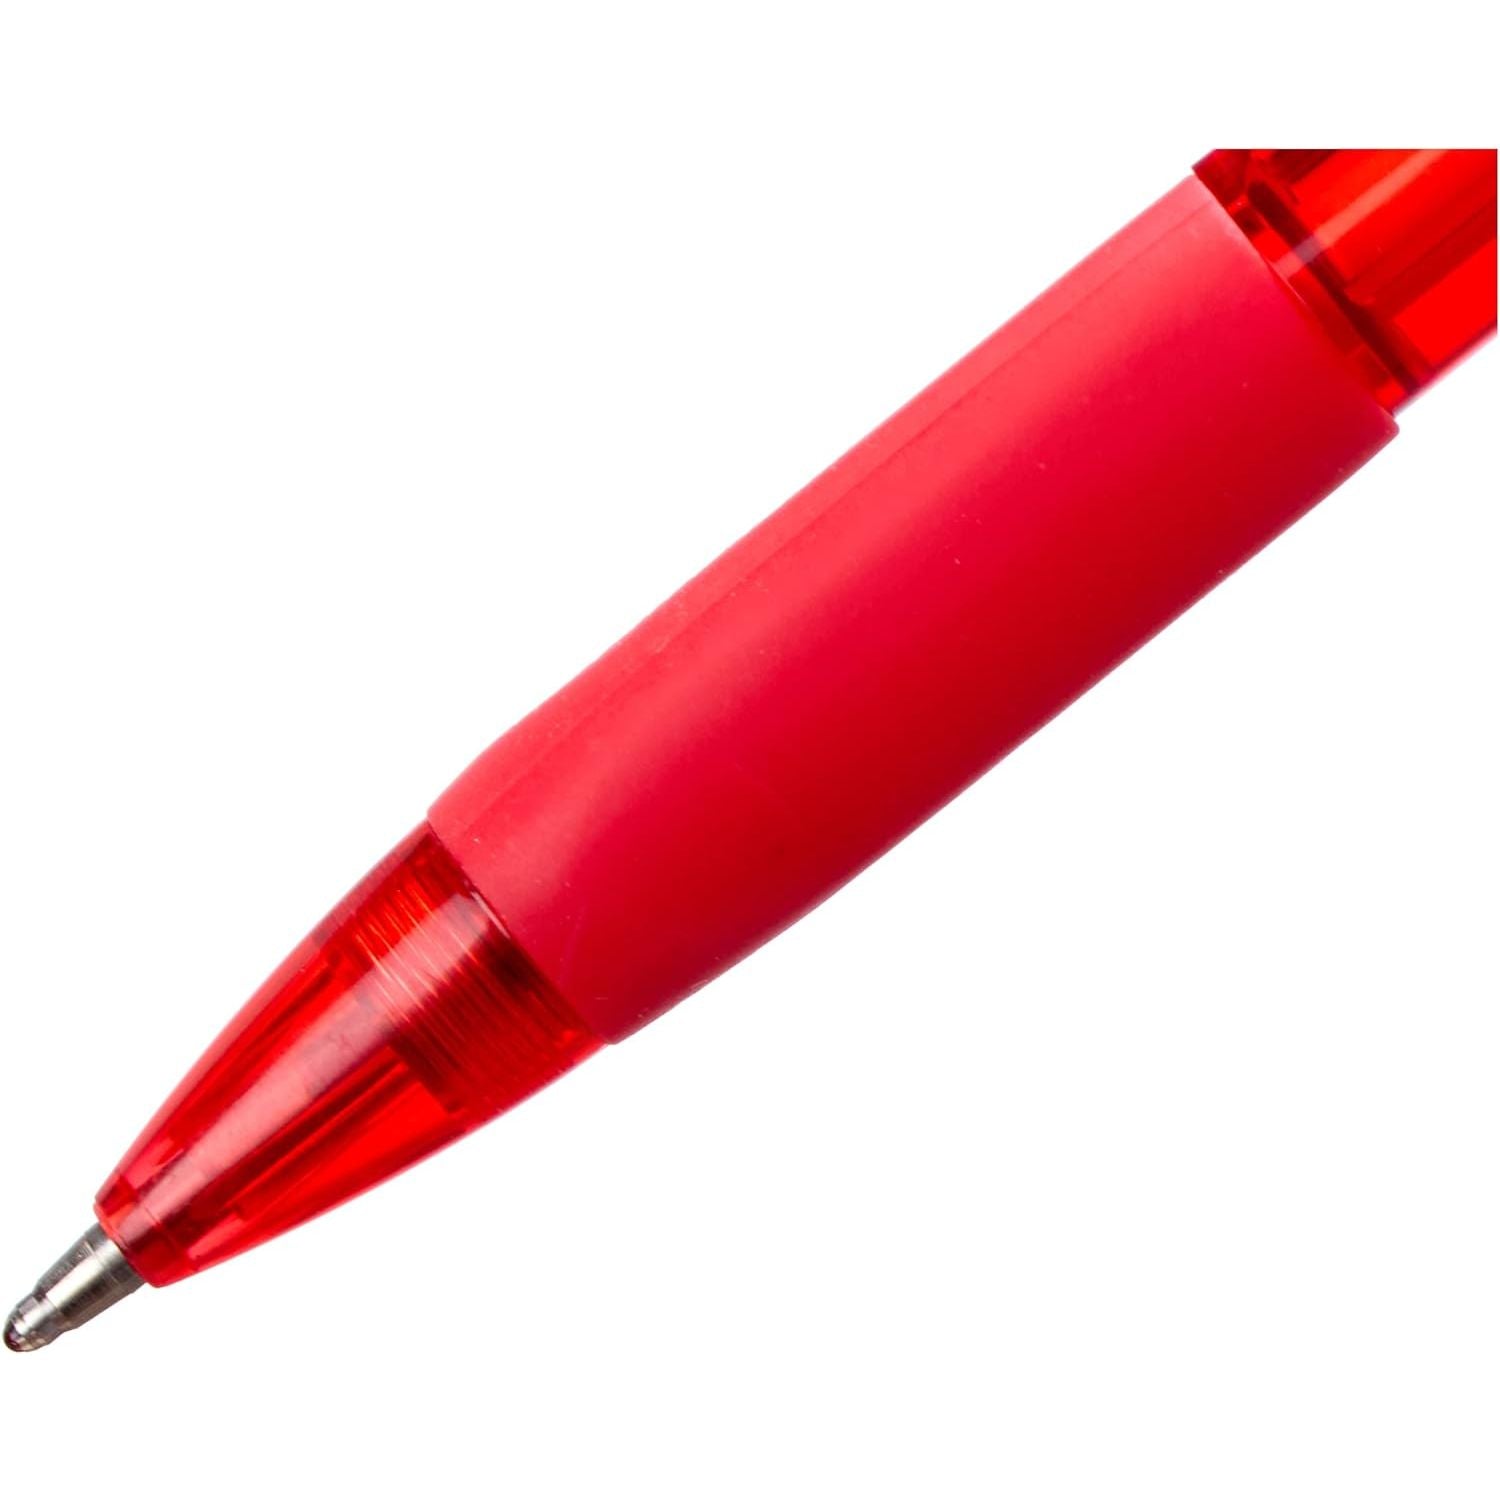 Faber-Castell Grip X-7 Ballpoint Pen Super Smooth (0.7mm, Set of 10 Pieces, Red)